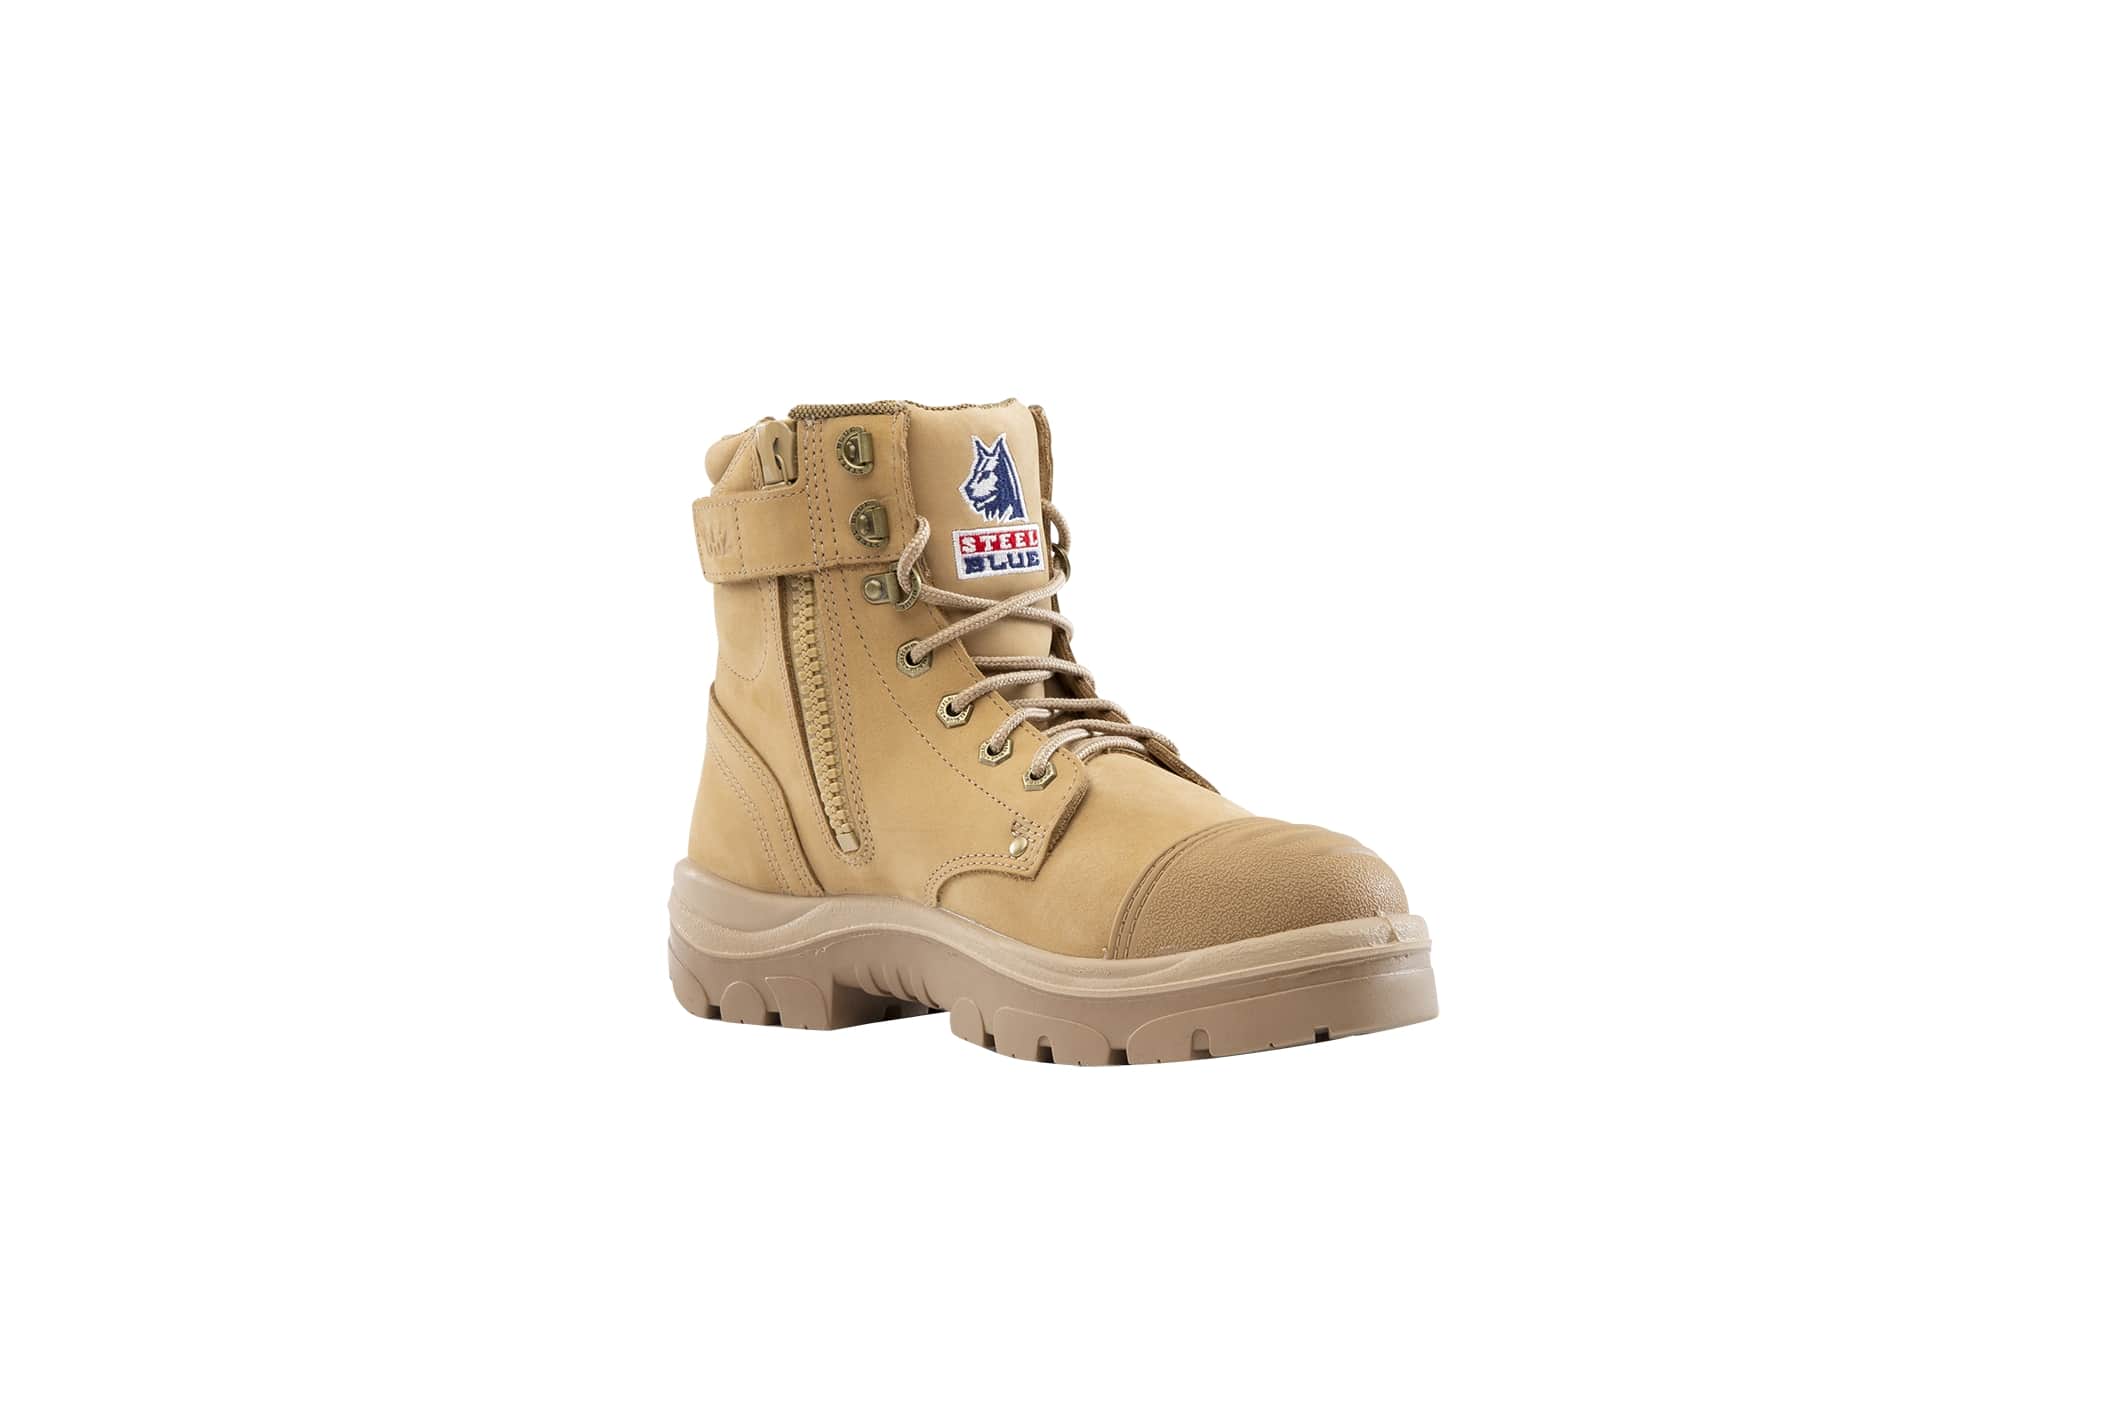 BOOT ARGYLE ZIP SCUFF CAP 10 -ANKLE LACE UP SAND TPU